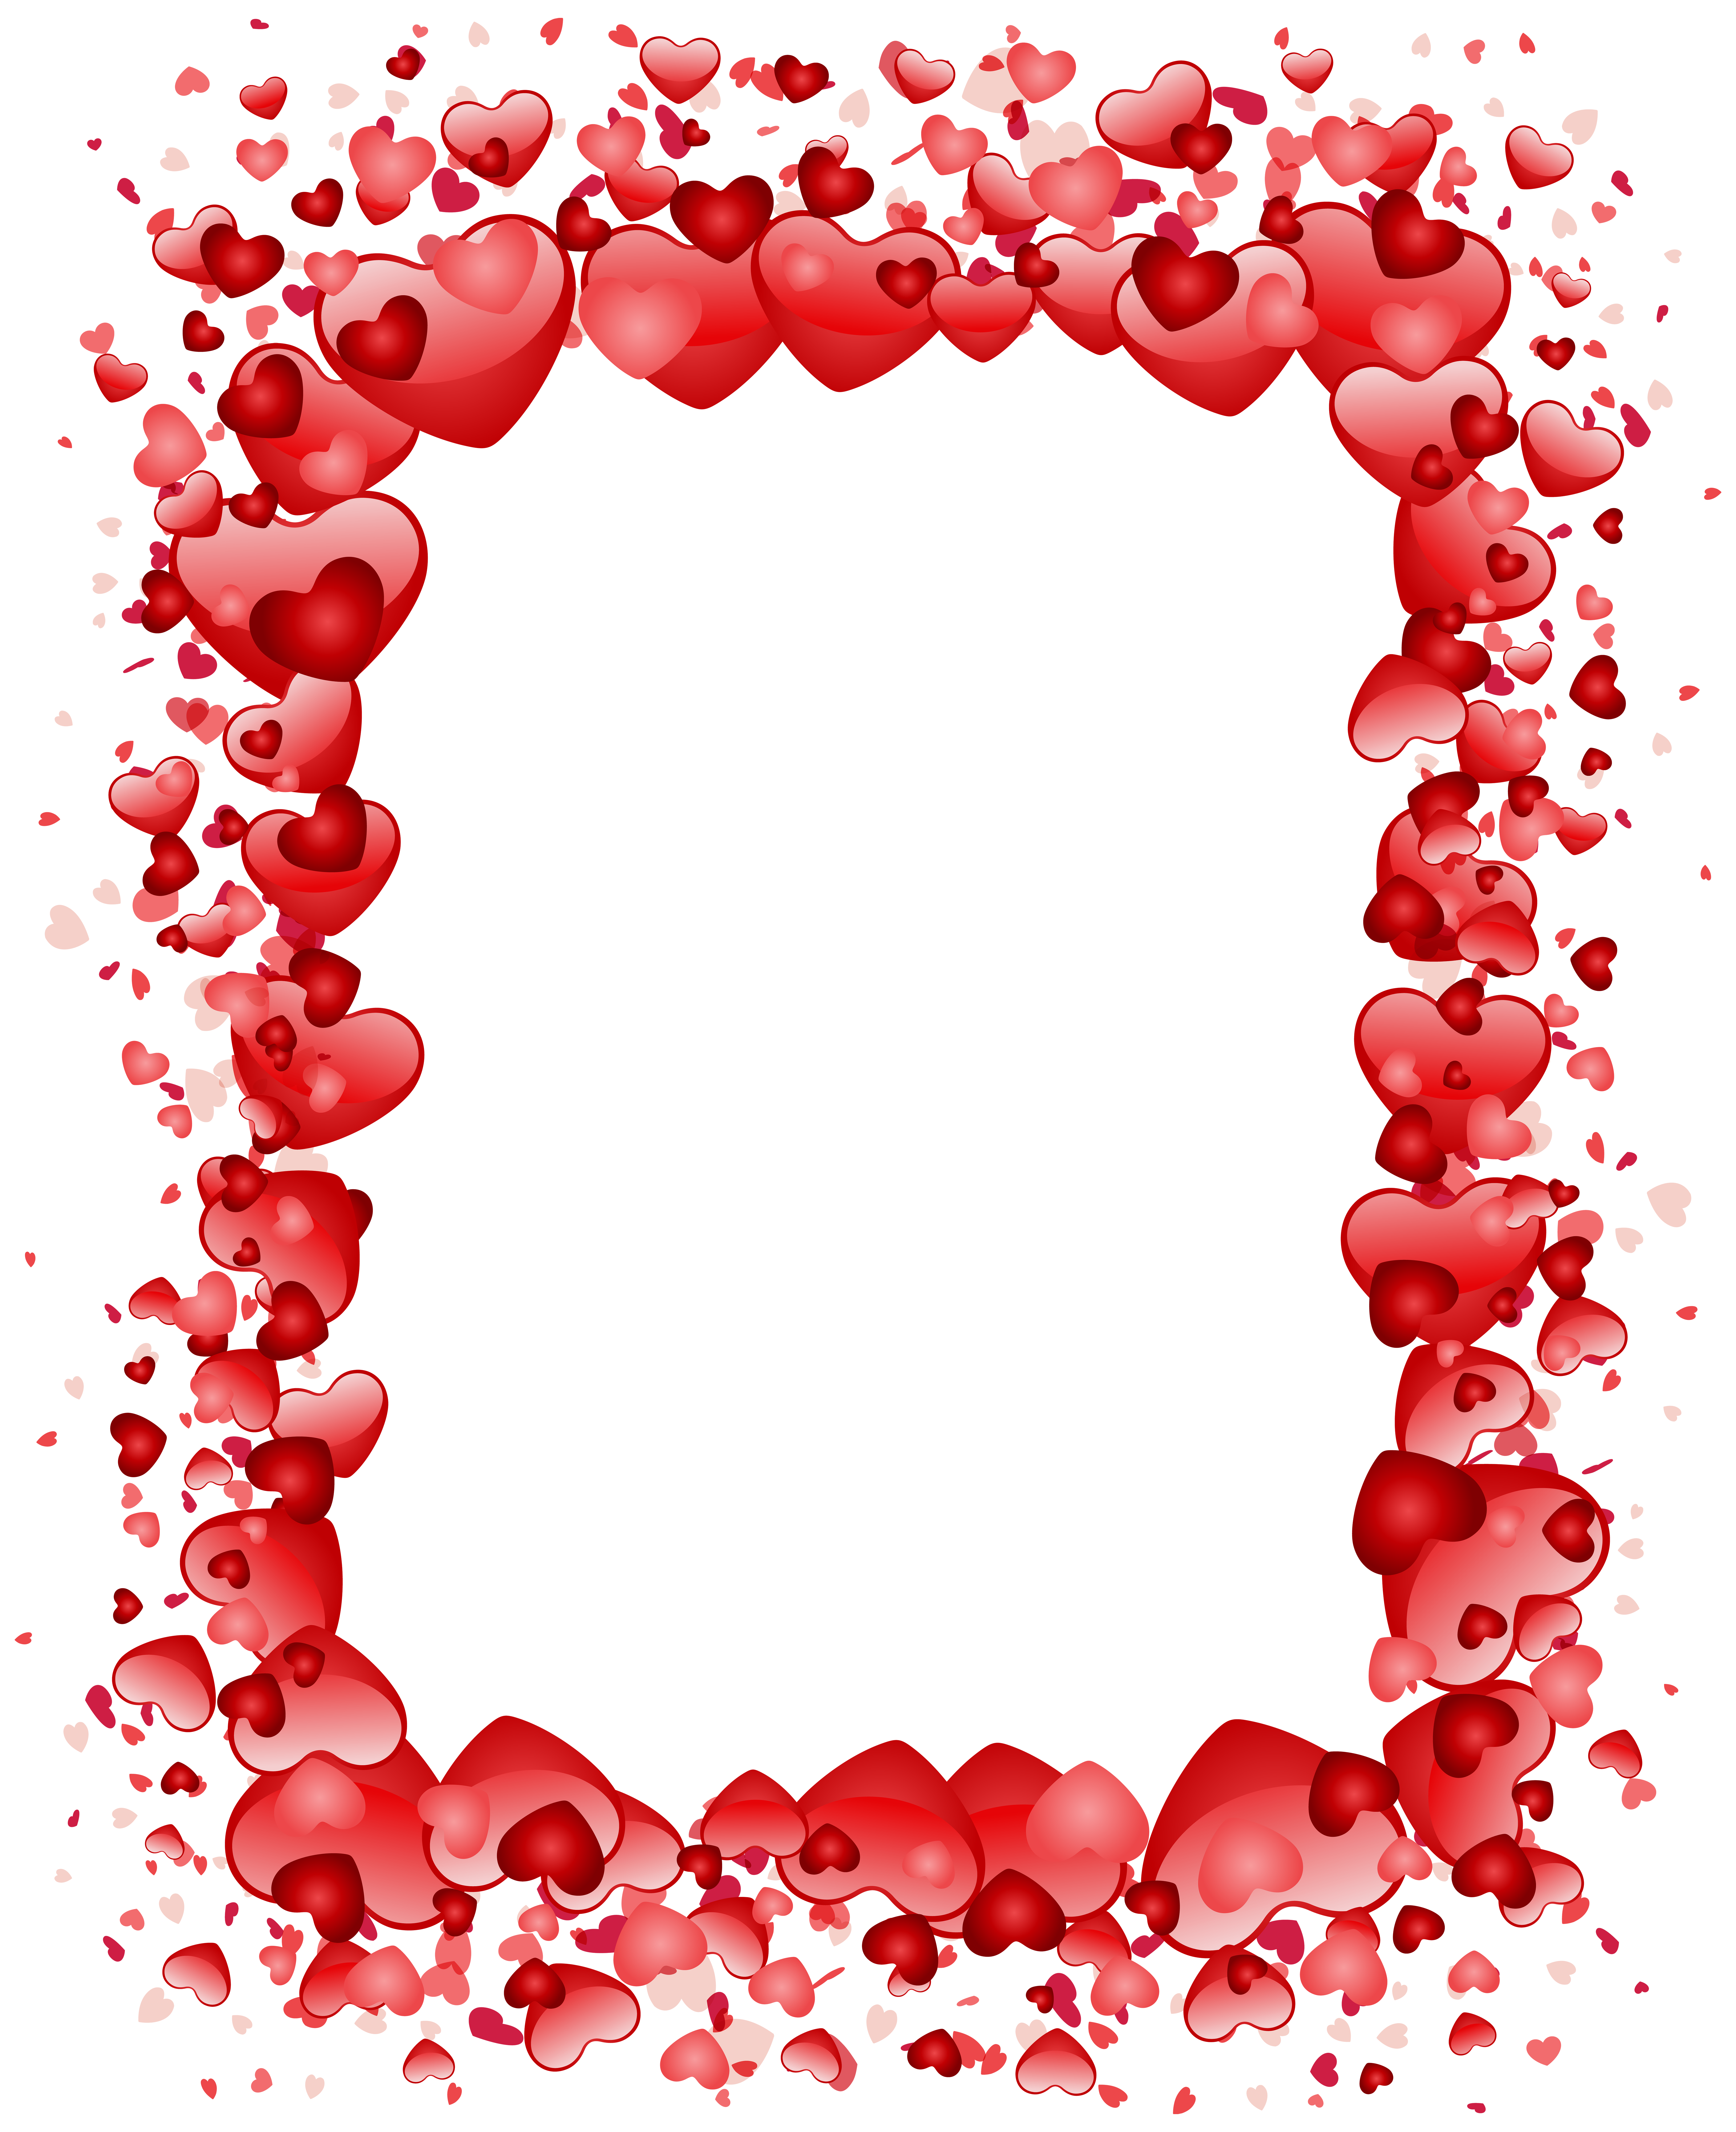 Red Heart Love PNG Image File